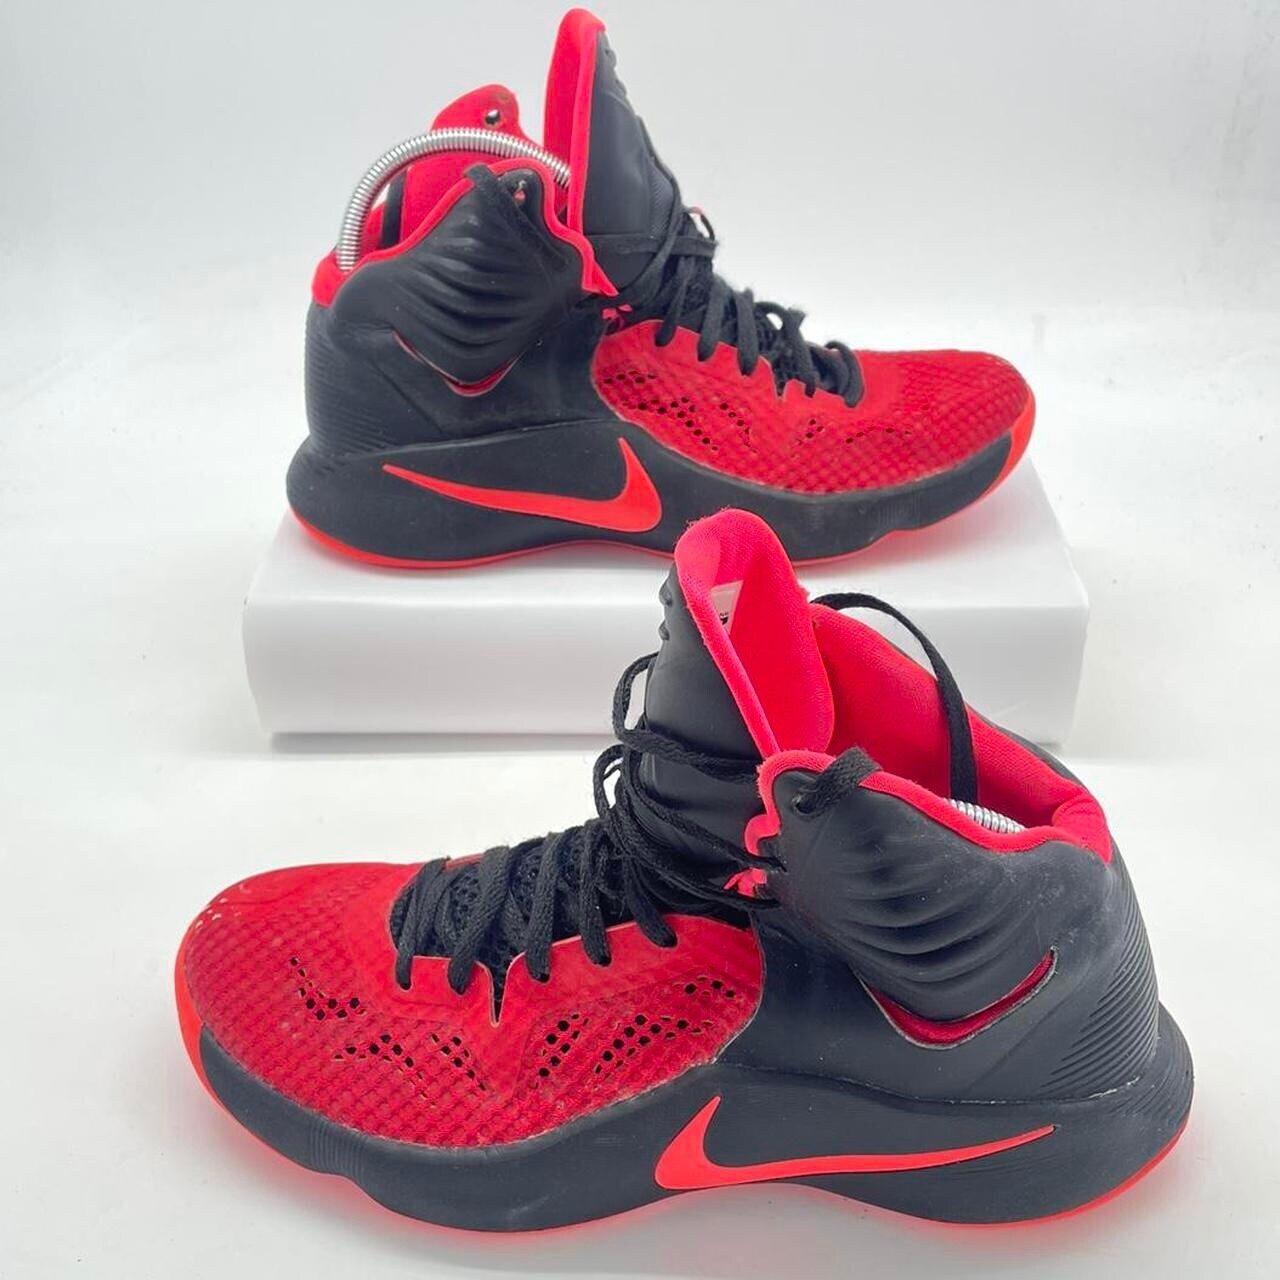 NIKE HYPERFUSE 201 'bred' Uk8.5 Made in China Etsy